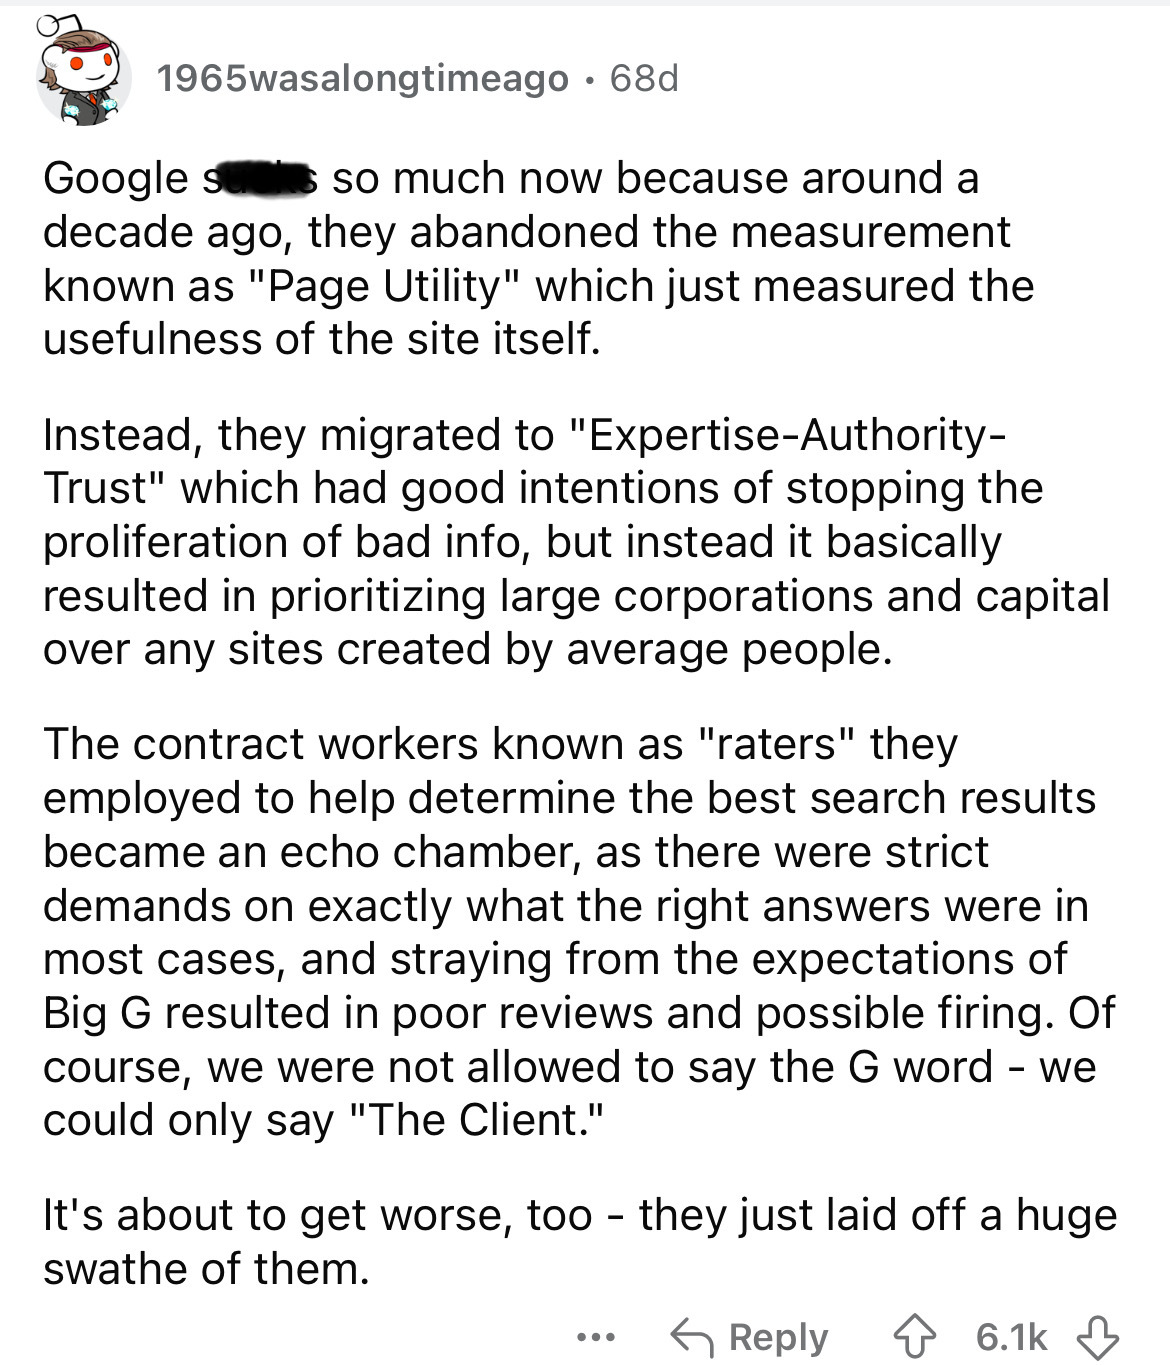 document - 1965wasalongtimeago. 68d Google se so much now because around a decade ago, they abandoned the measurement known as "Page Utility" which just measured the usefulness of the site itself. Instead, they migrated to "ExpertiseAuthority Trust" which